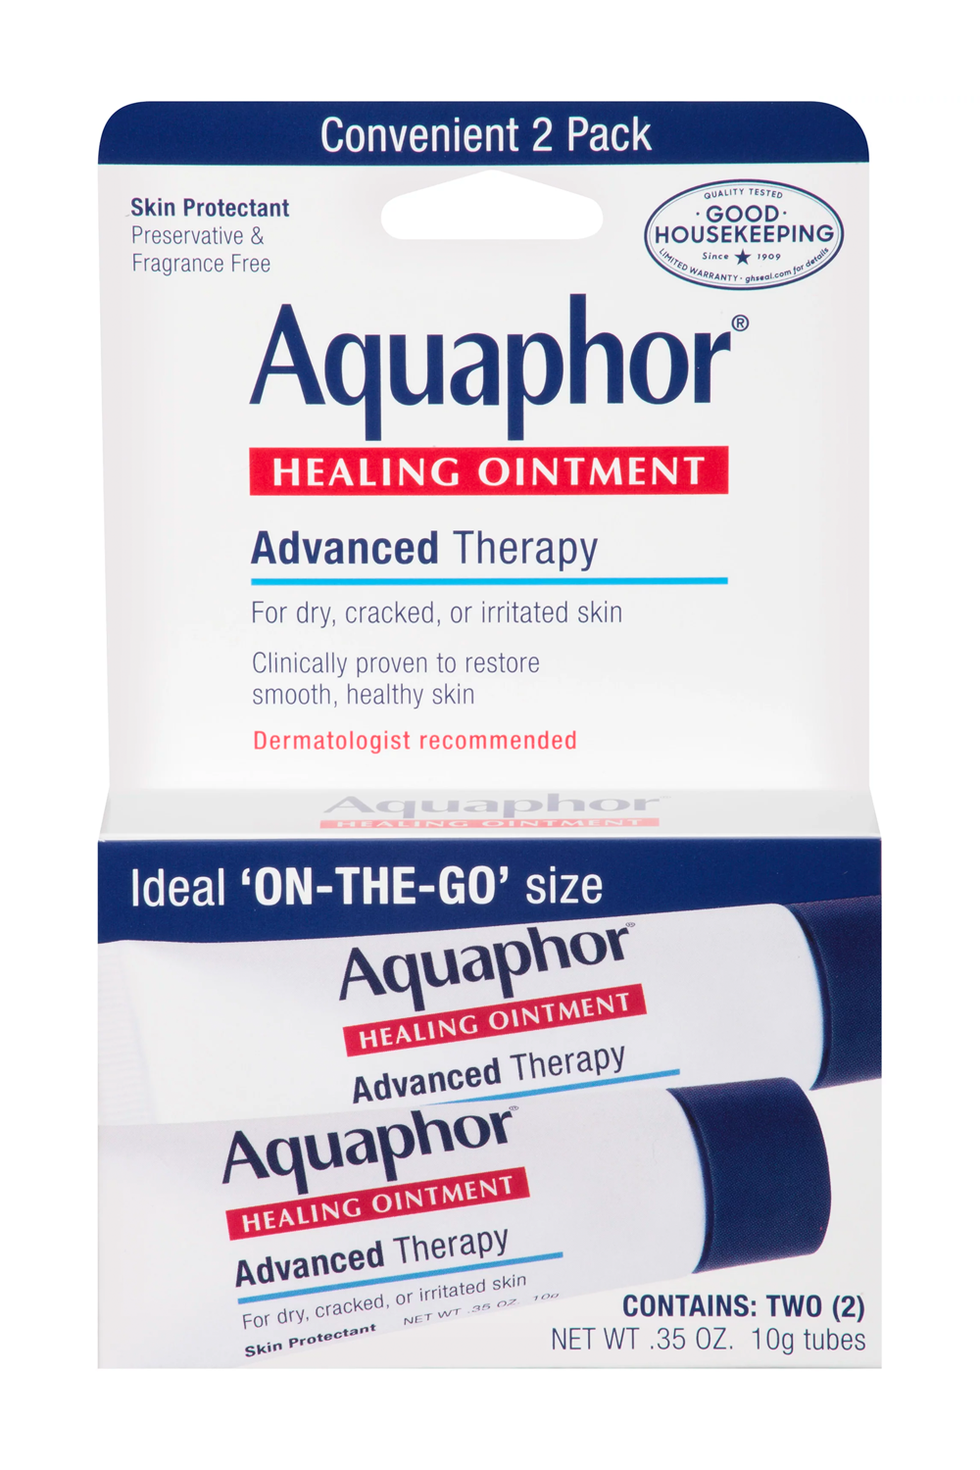 Aquaphor On-the-Go Healing Ointment Advanced Therapy Skin Protectant